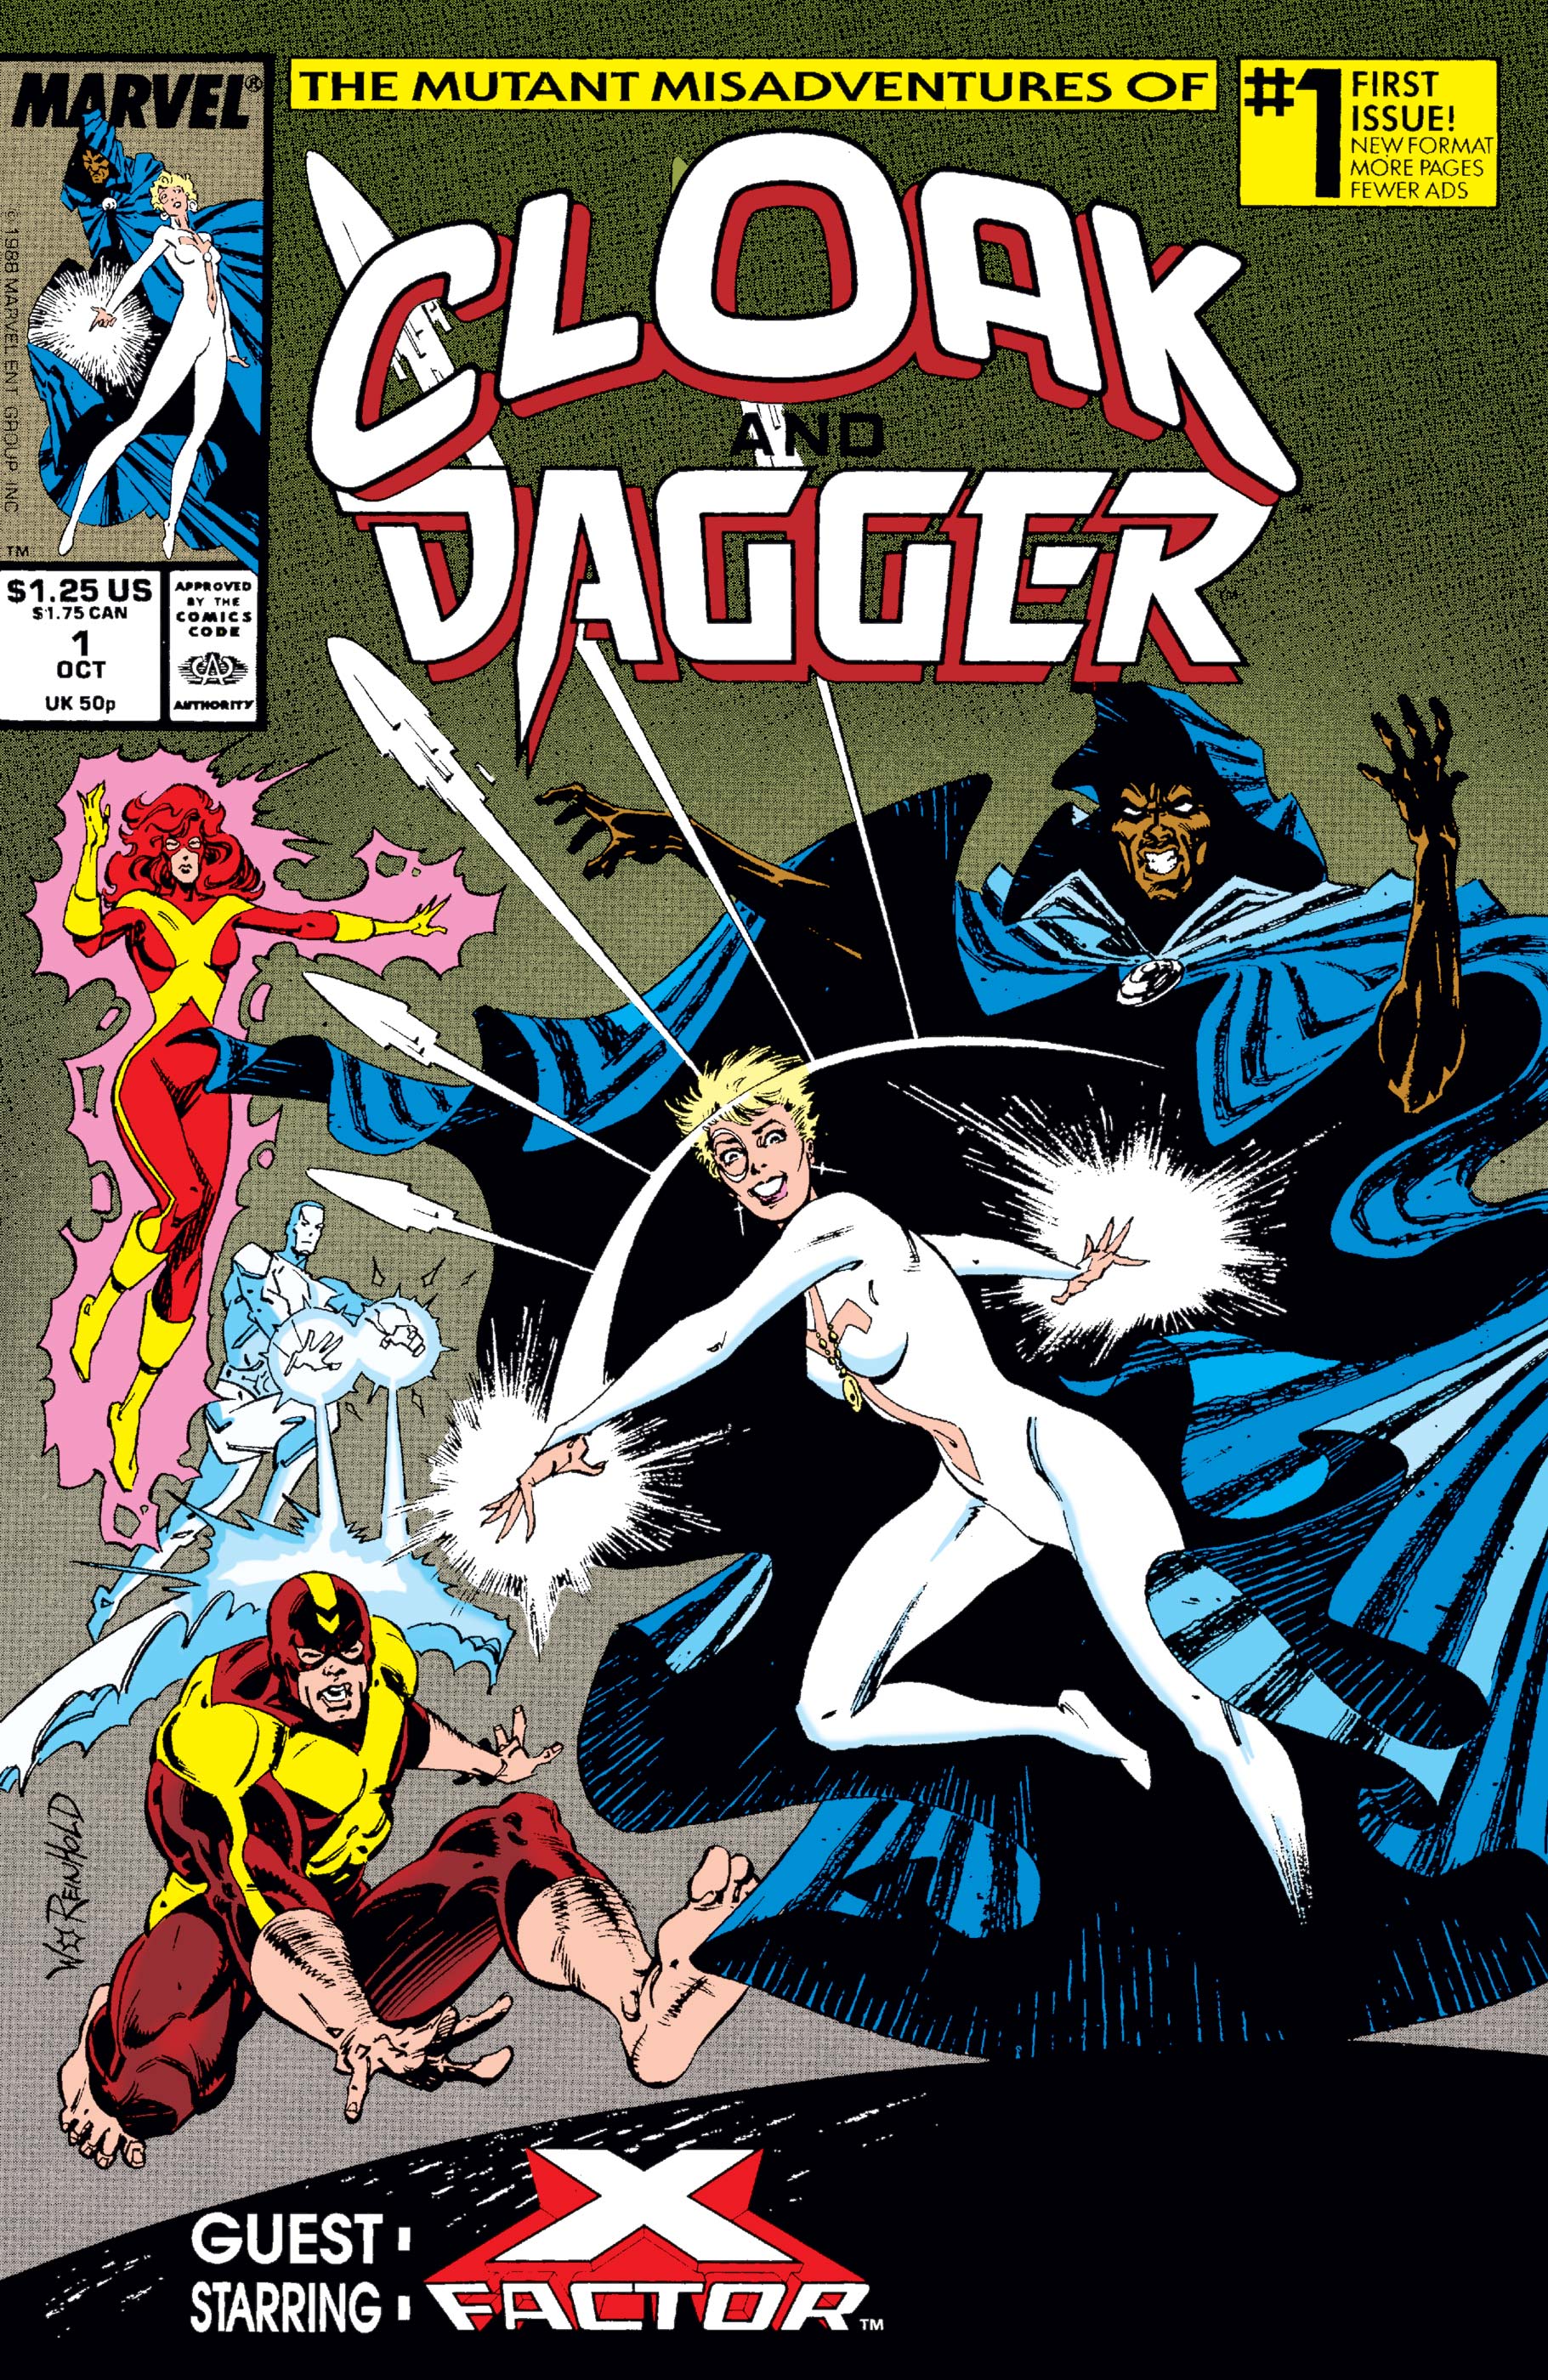 The Mutant Misadventures of Cloak and Dagger (1988) #1